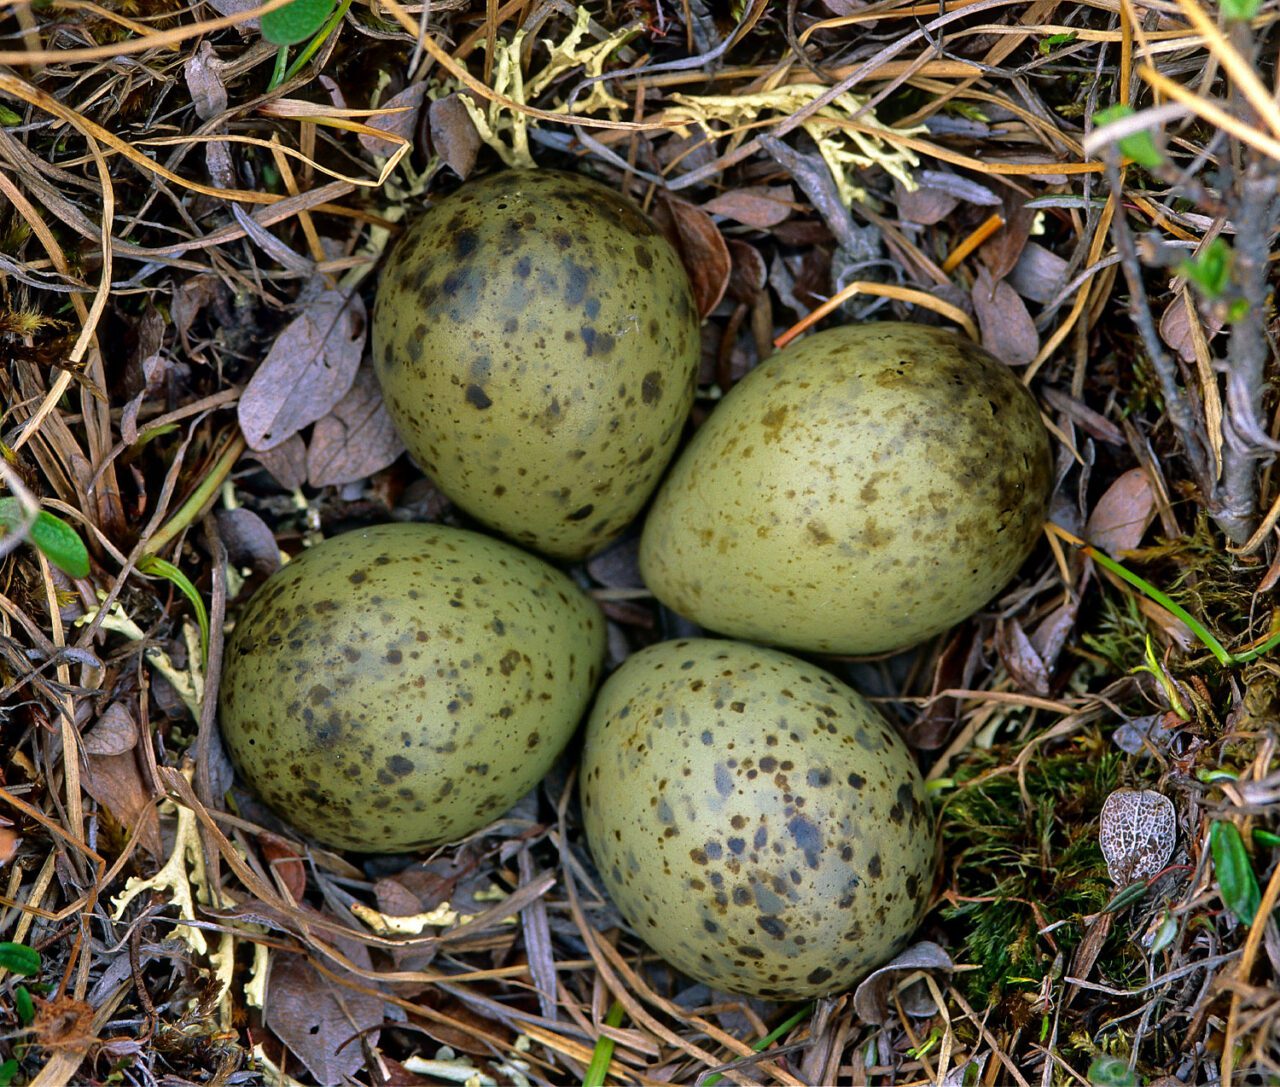 Four greenish, speckled eggs in a nest.